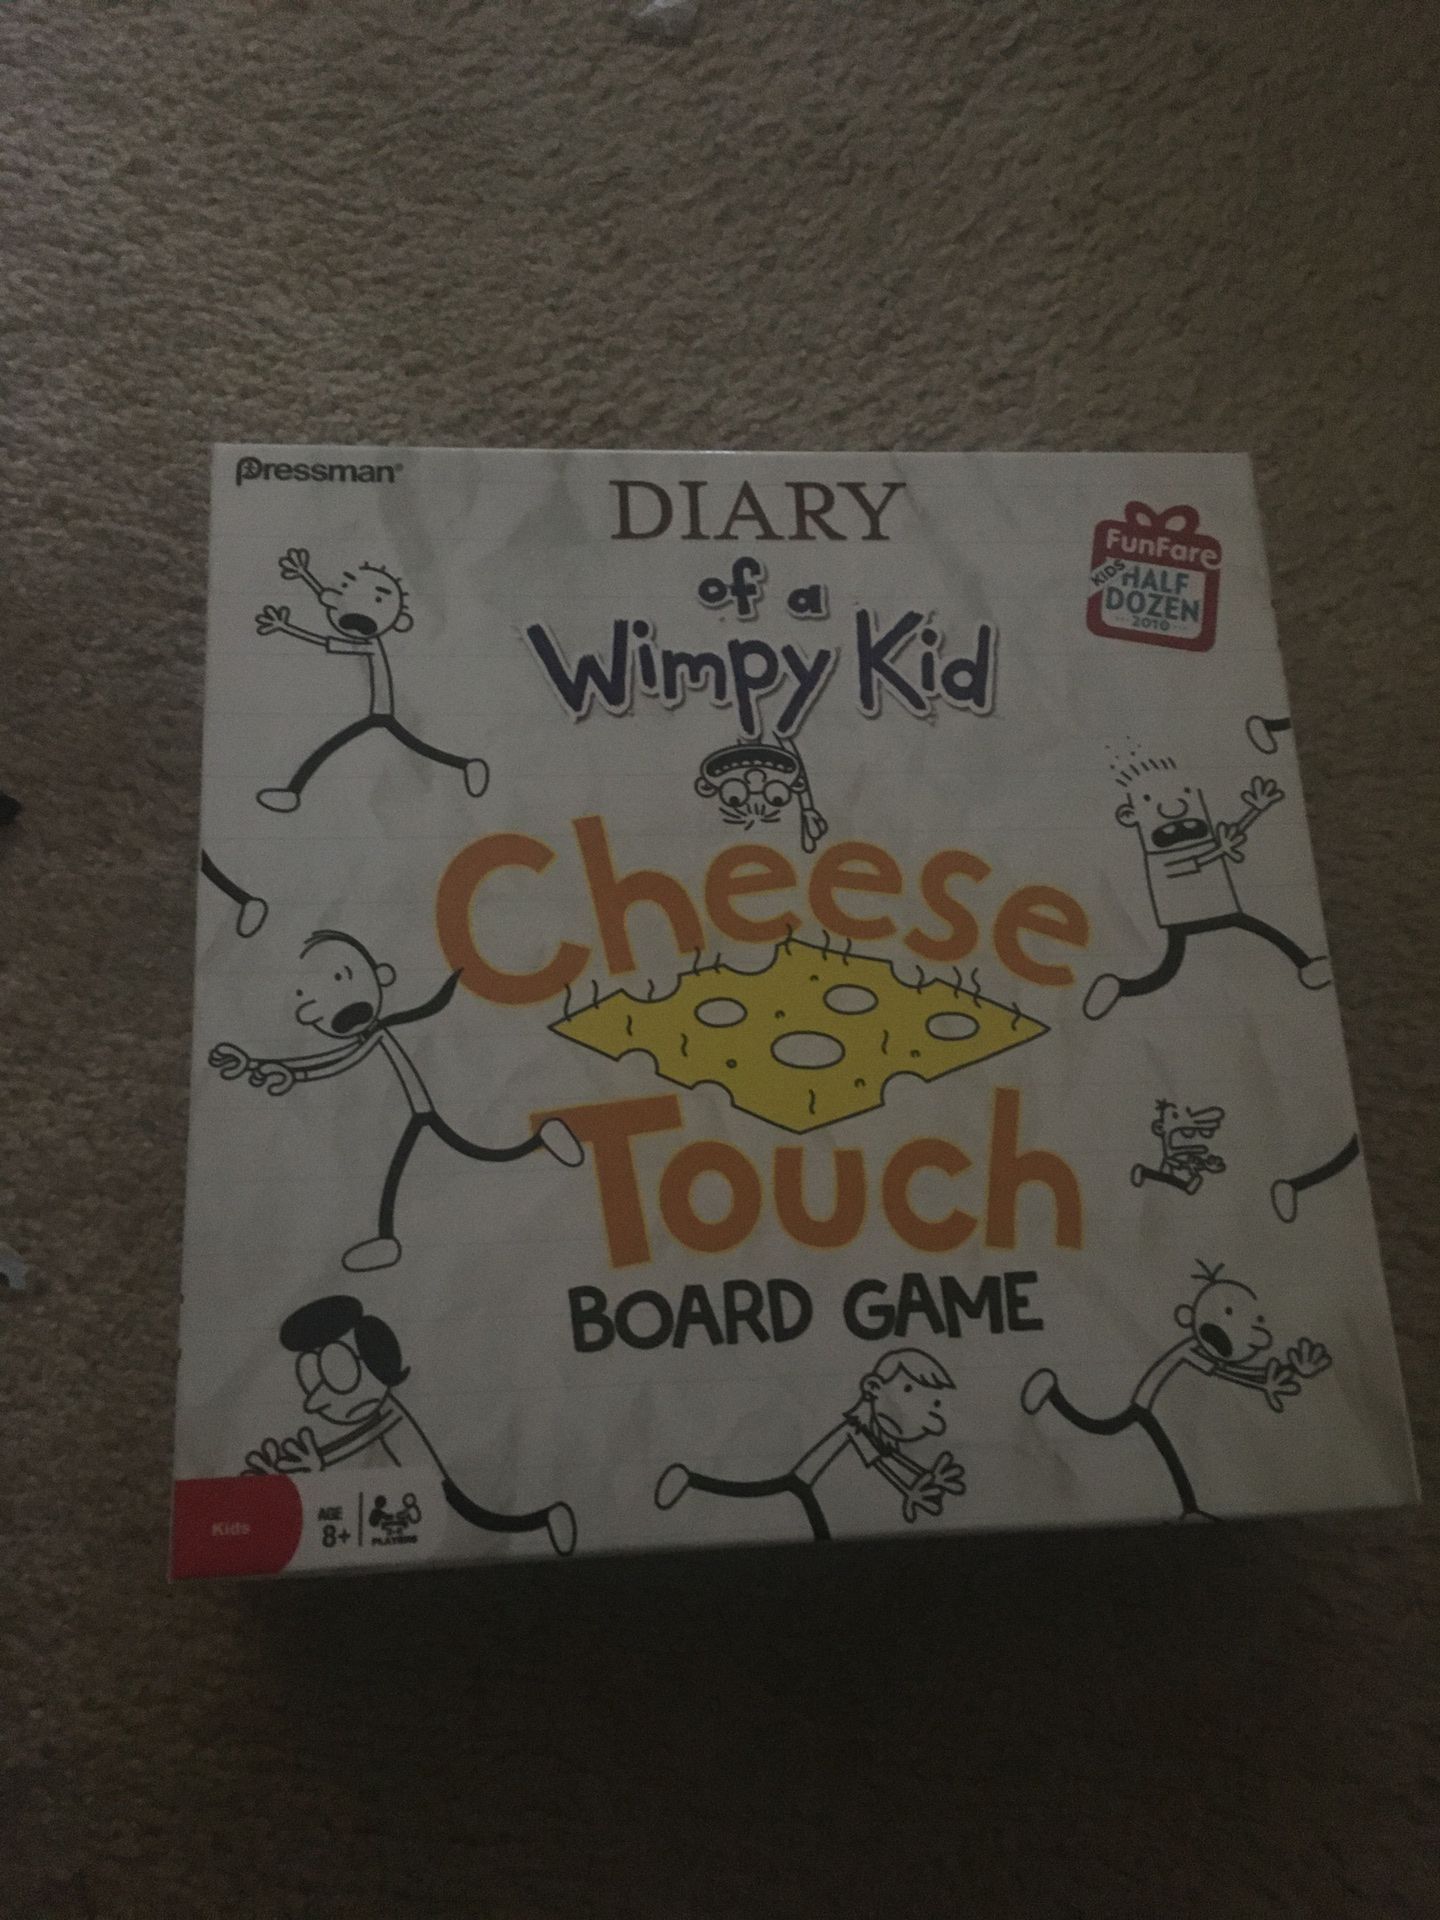 Dairy of a wimpy kid board game cheese touch